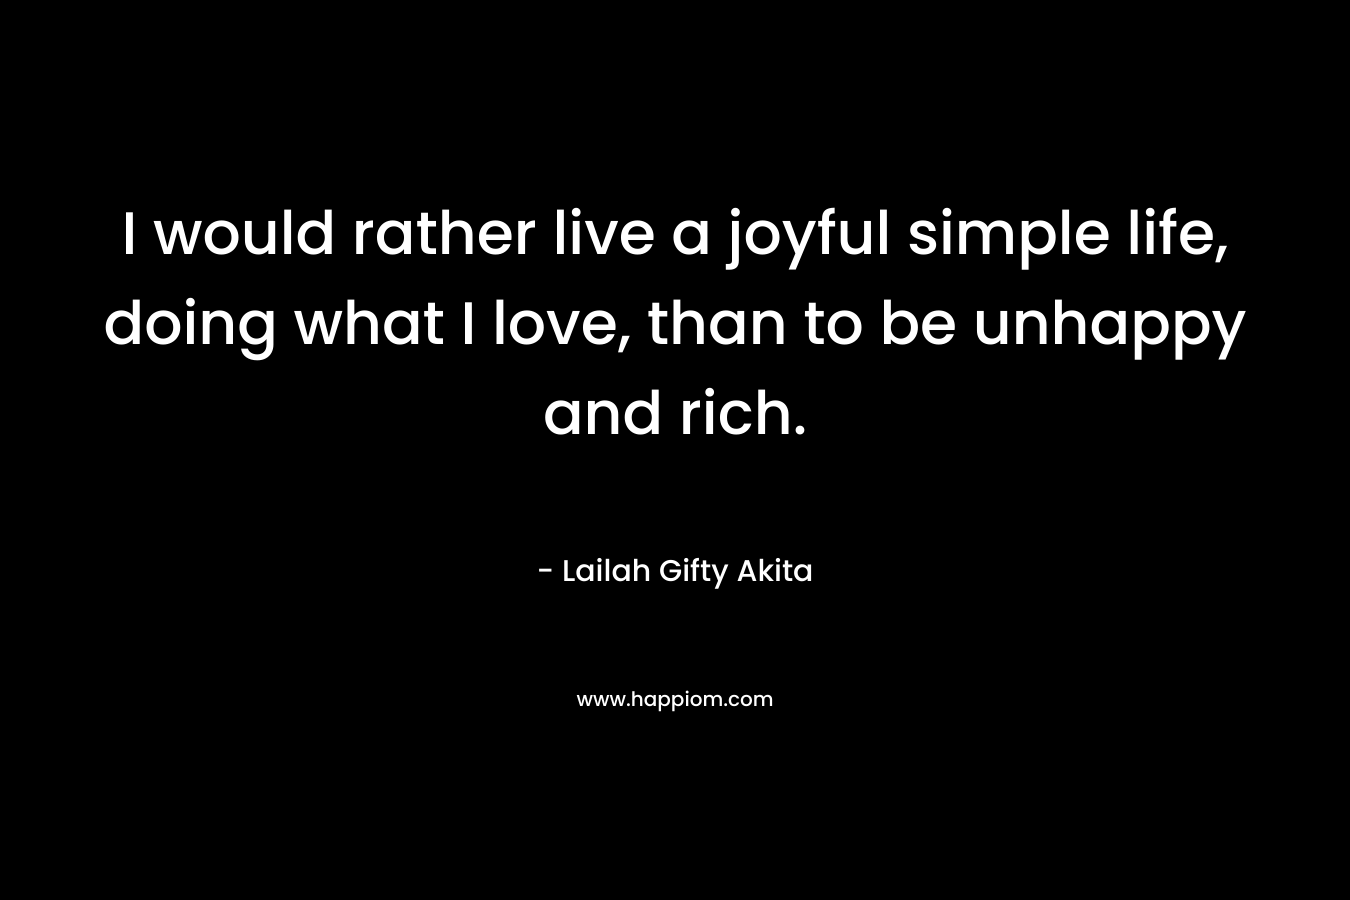 I would rather live a joyful simple life, doing what I love, than to be unhappy and rich.